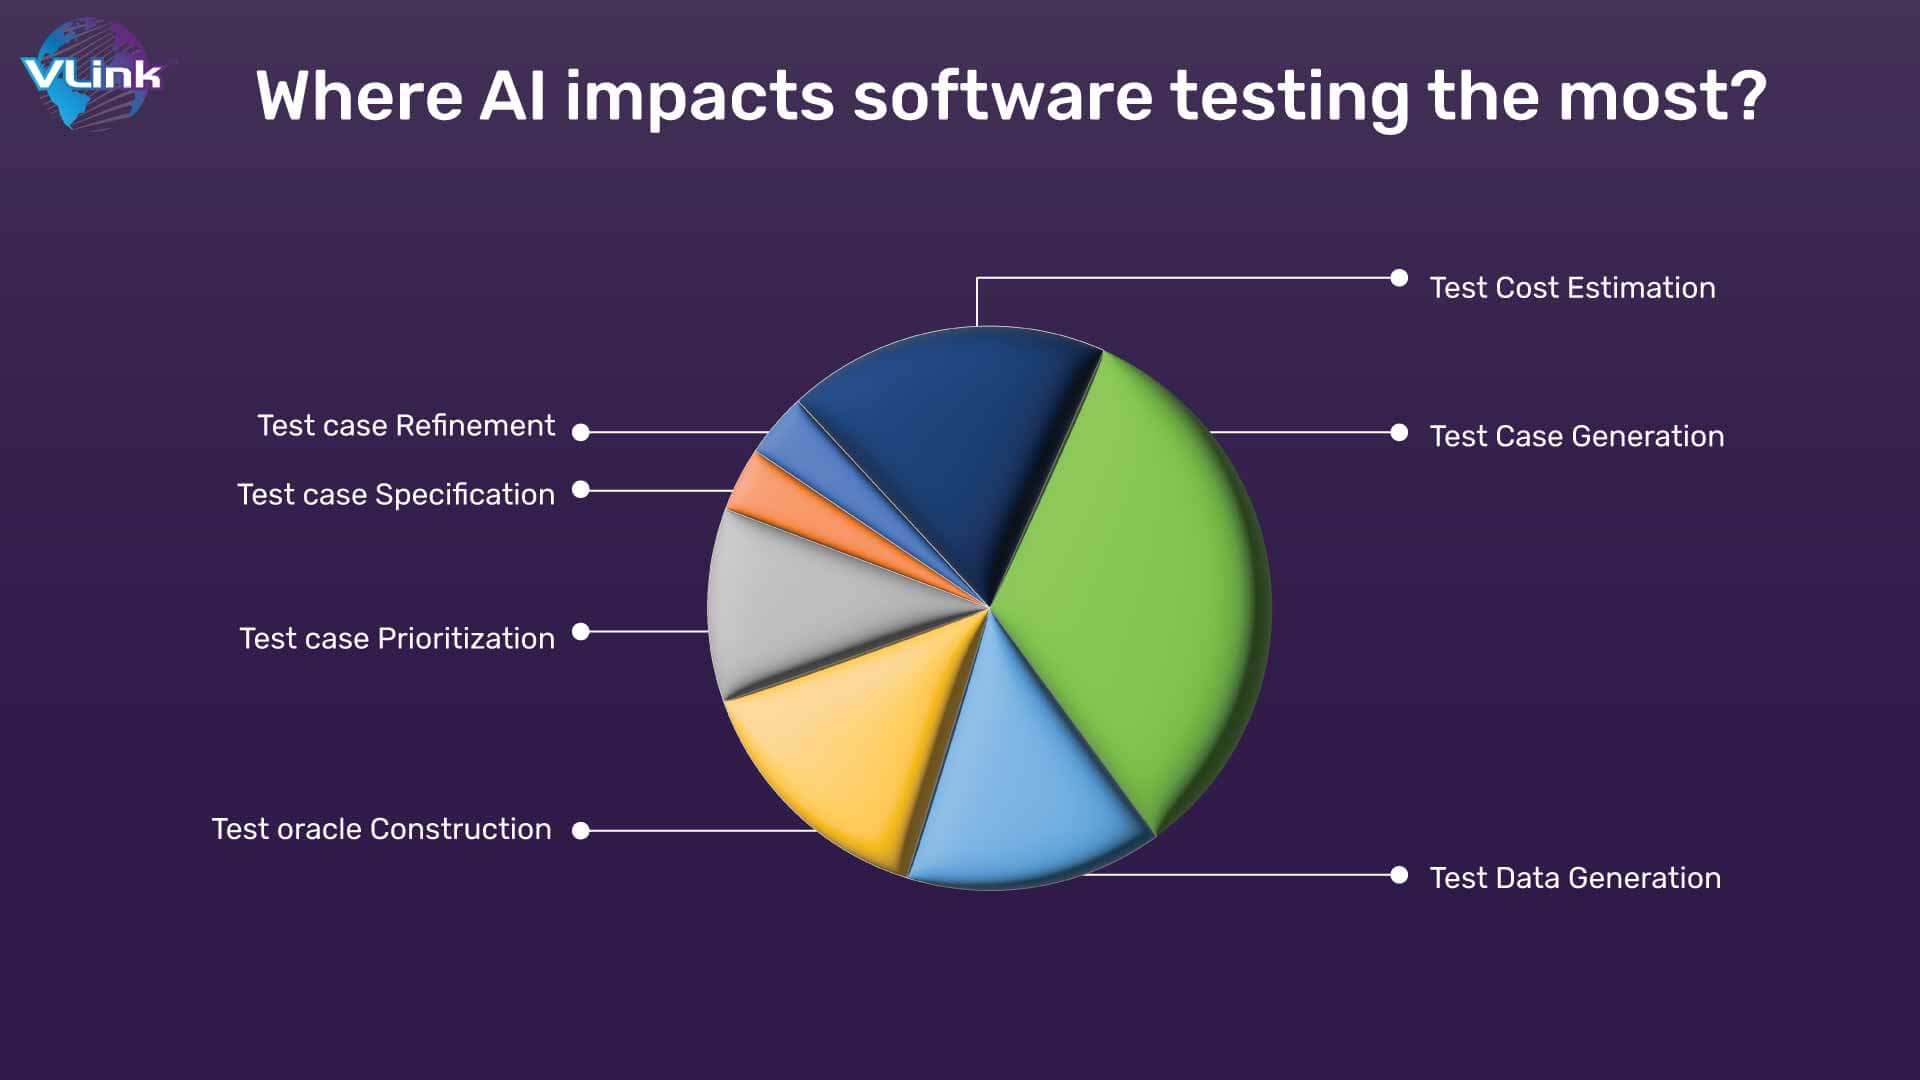 Where AI impacts software testing the most